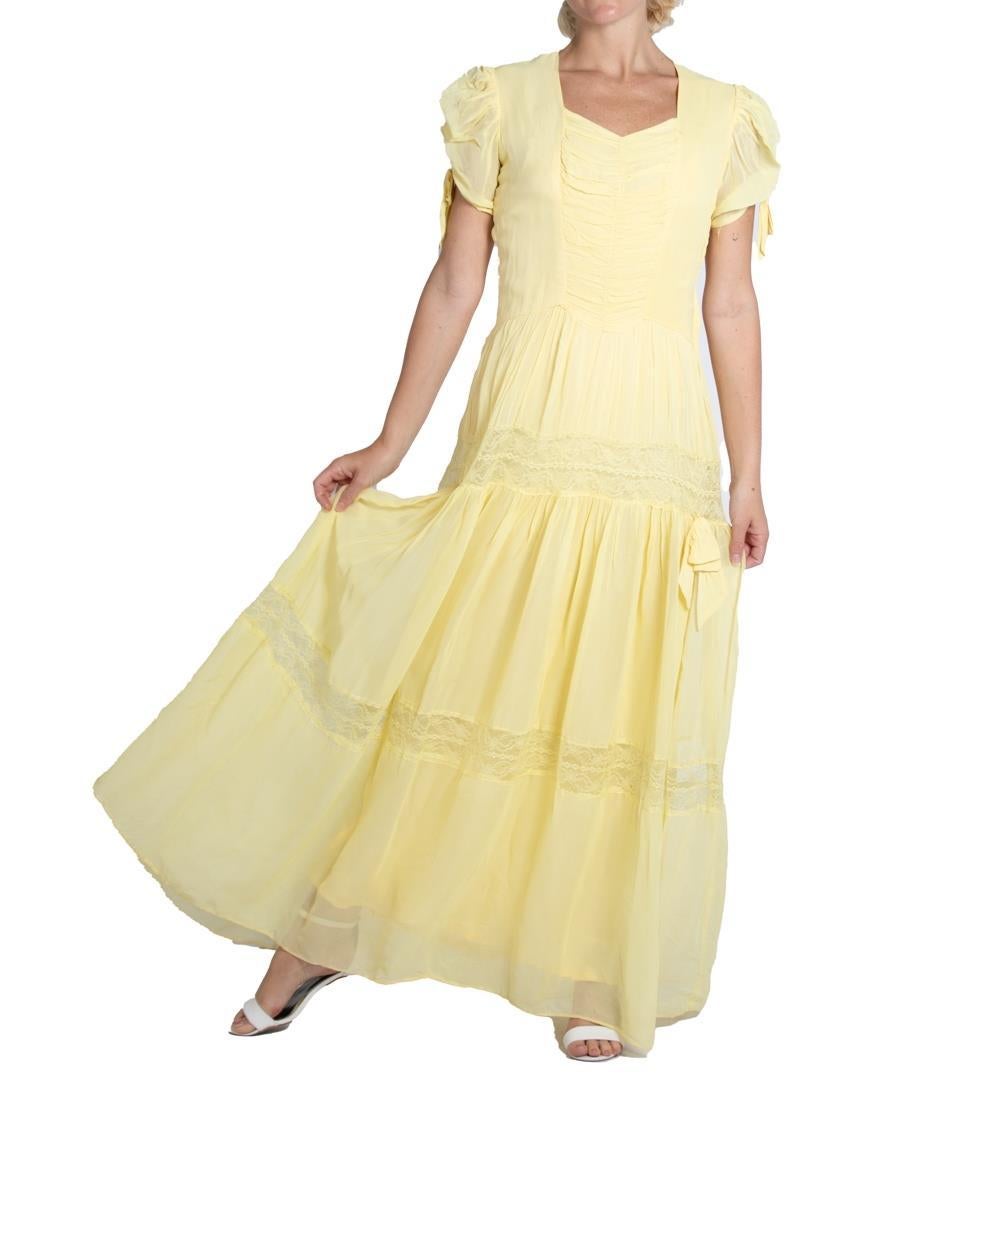 1940S Yellow Chiffon Gown With Tiers Of Lace Trim For Sale 1